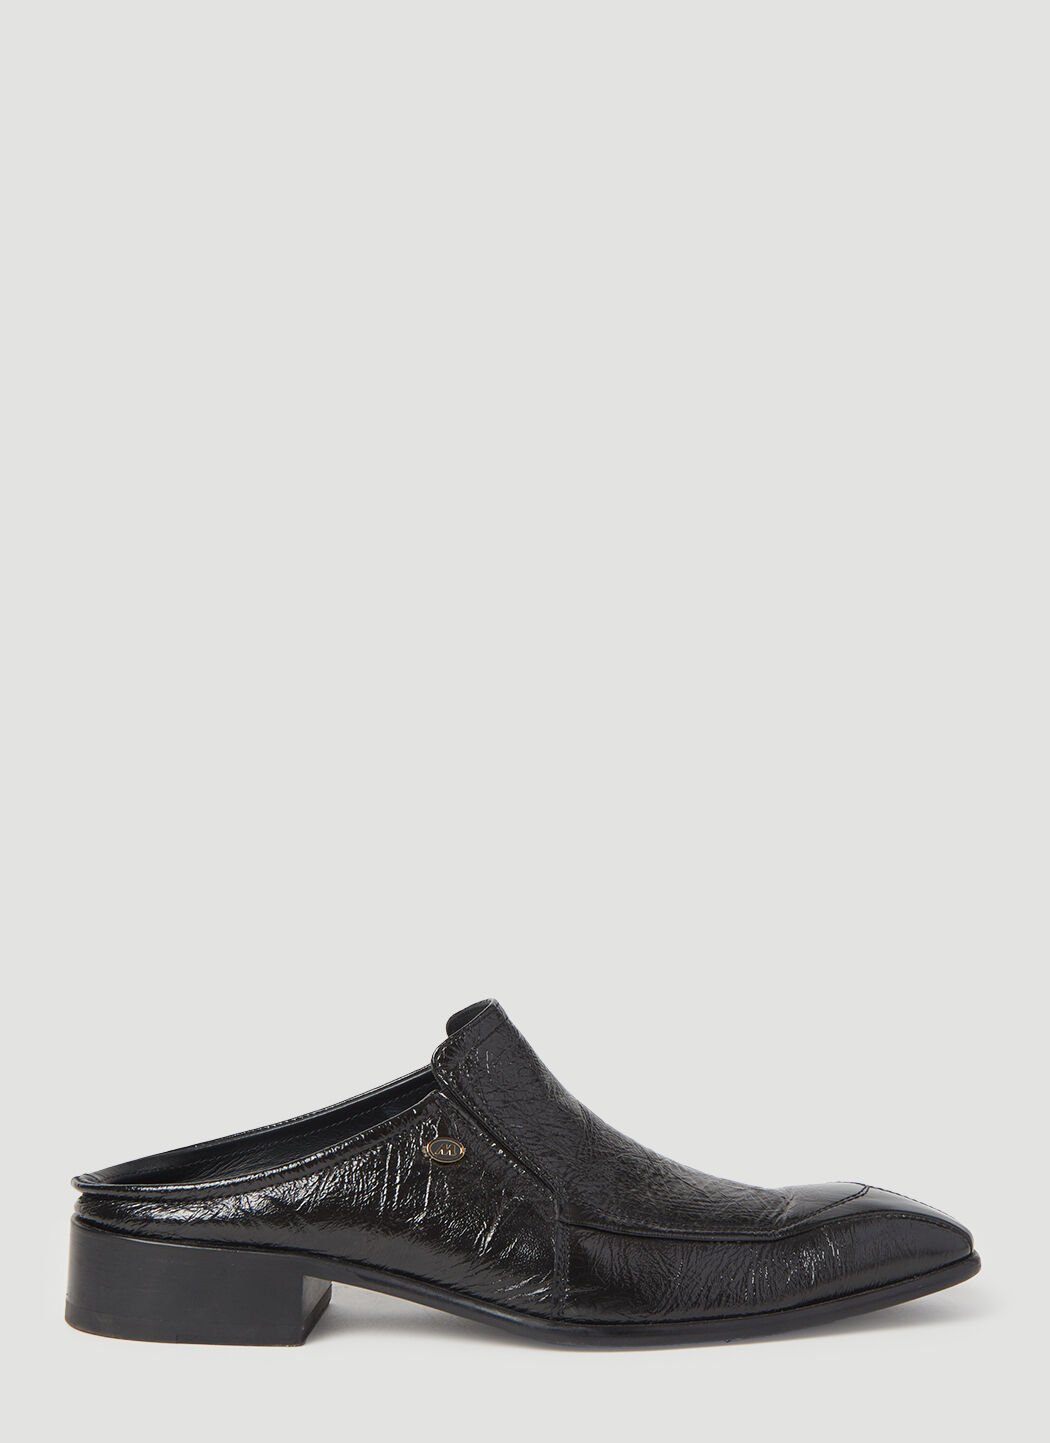 Martine Rose Snout Mule Loafers Black mtr0156015